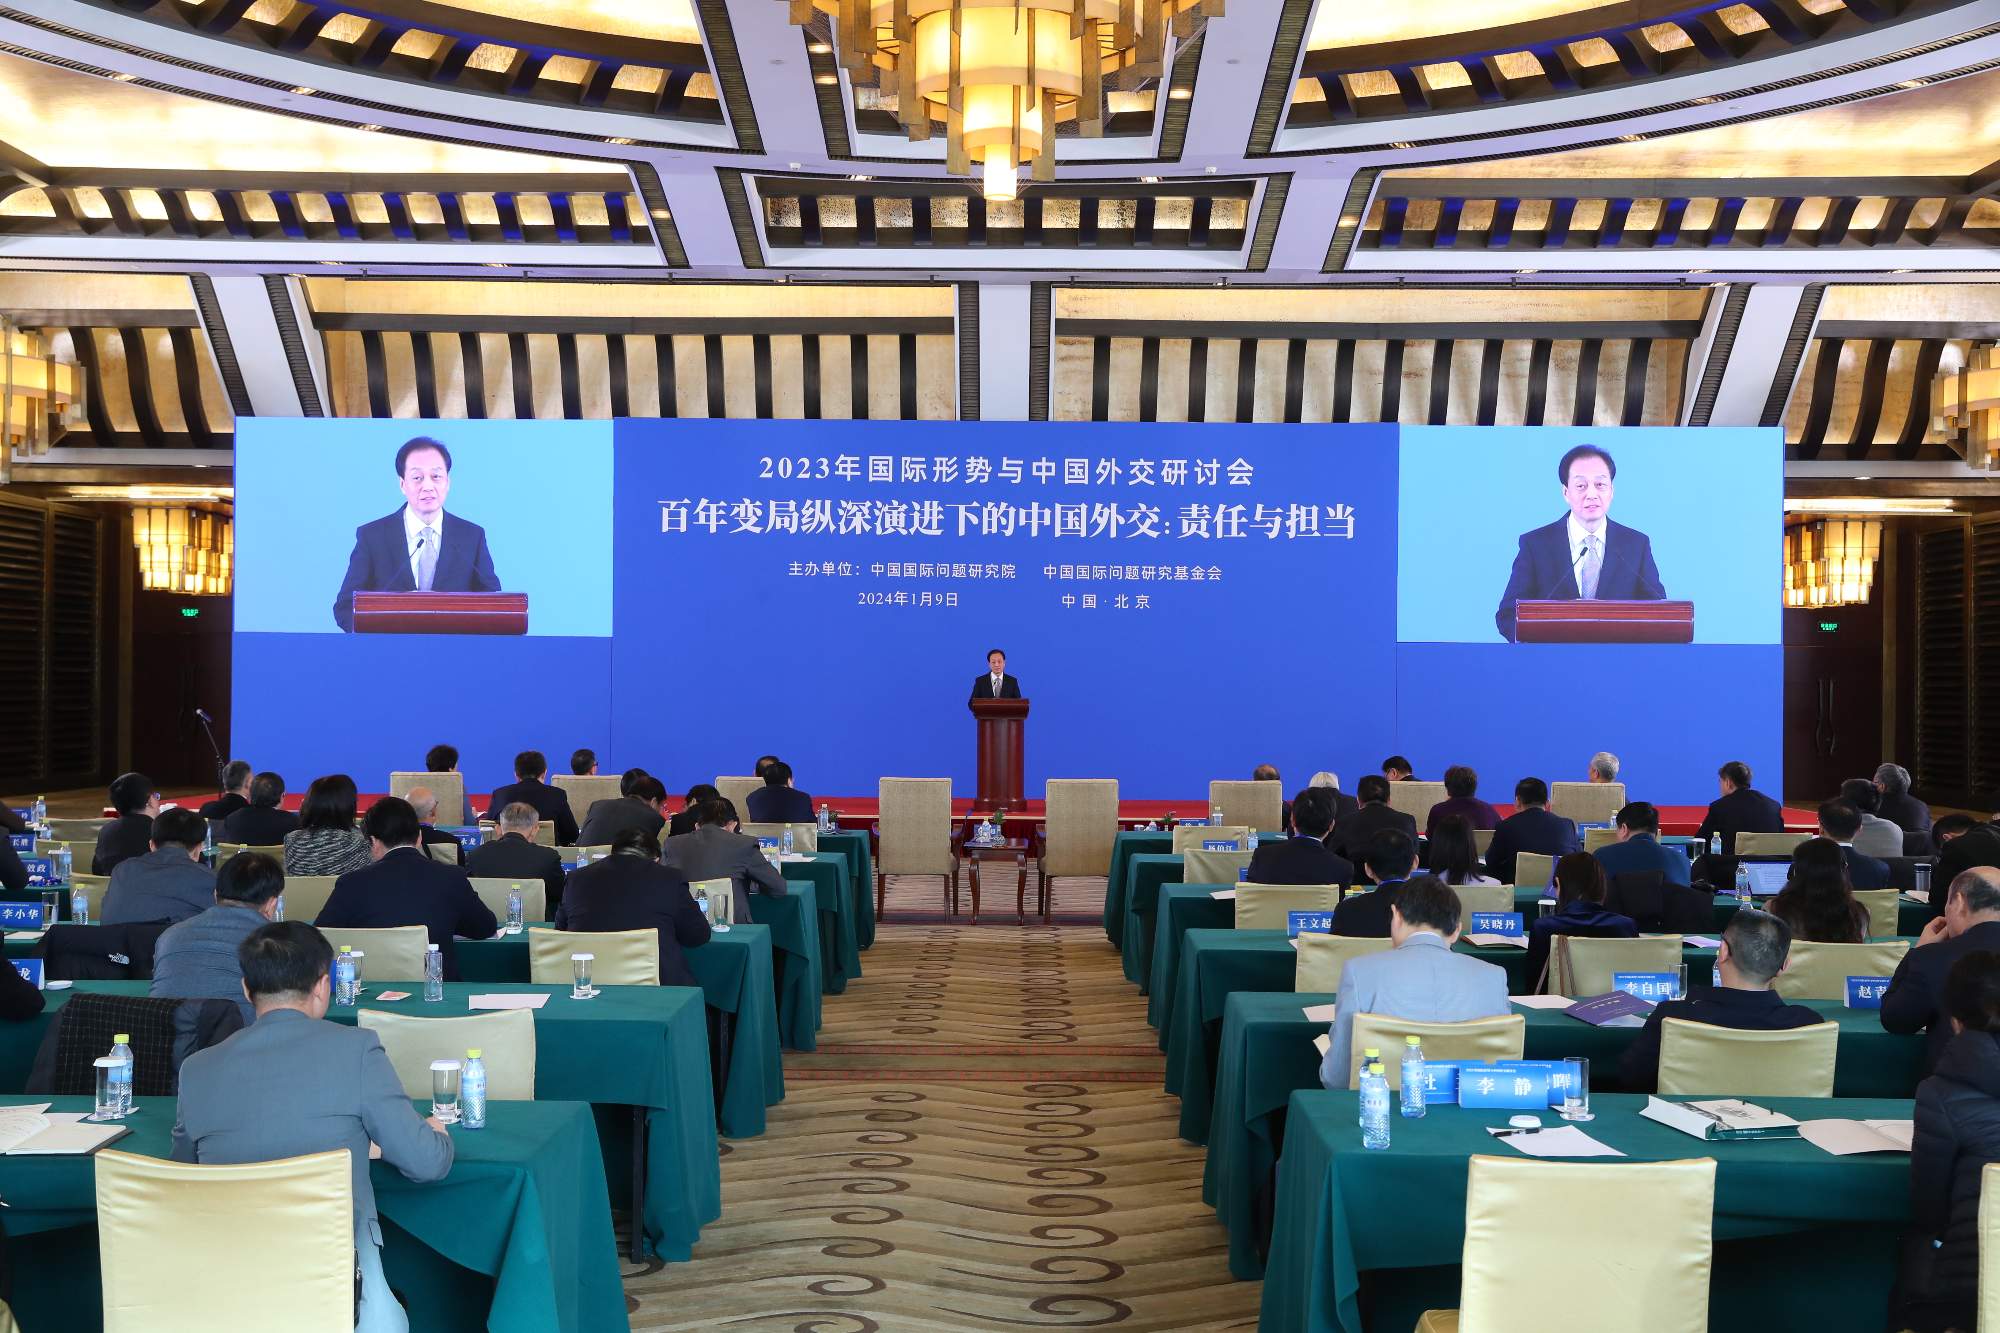 President Wang Chao Attends and Addresses the Symposium on the International Situation and China’s Foreign Relations in 2023